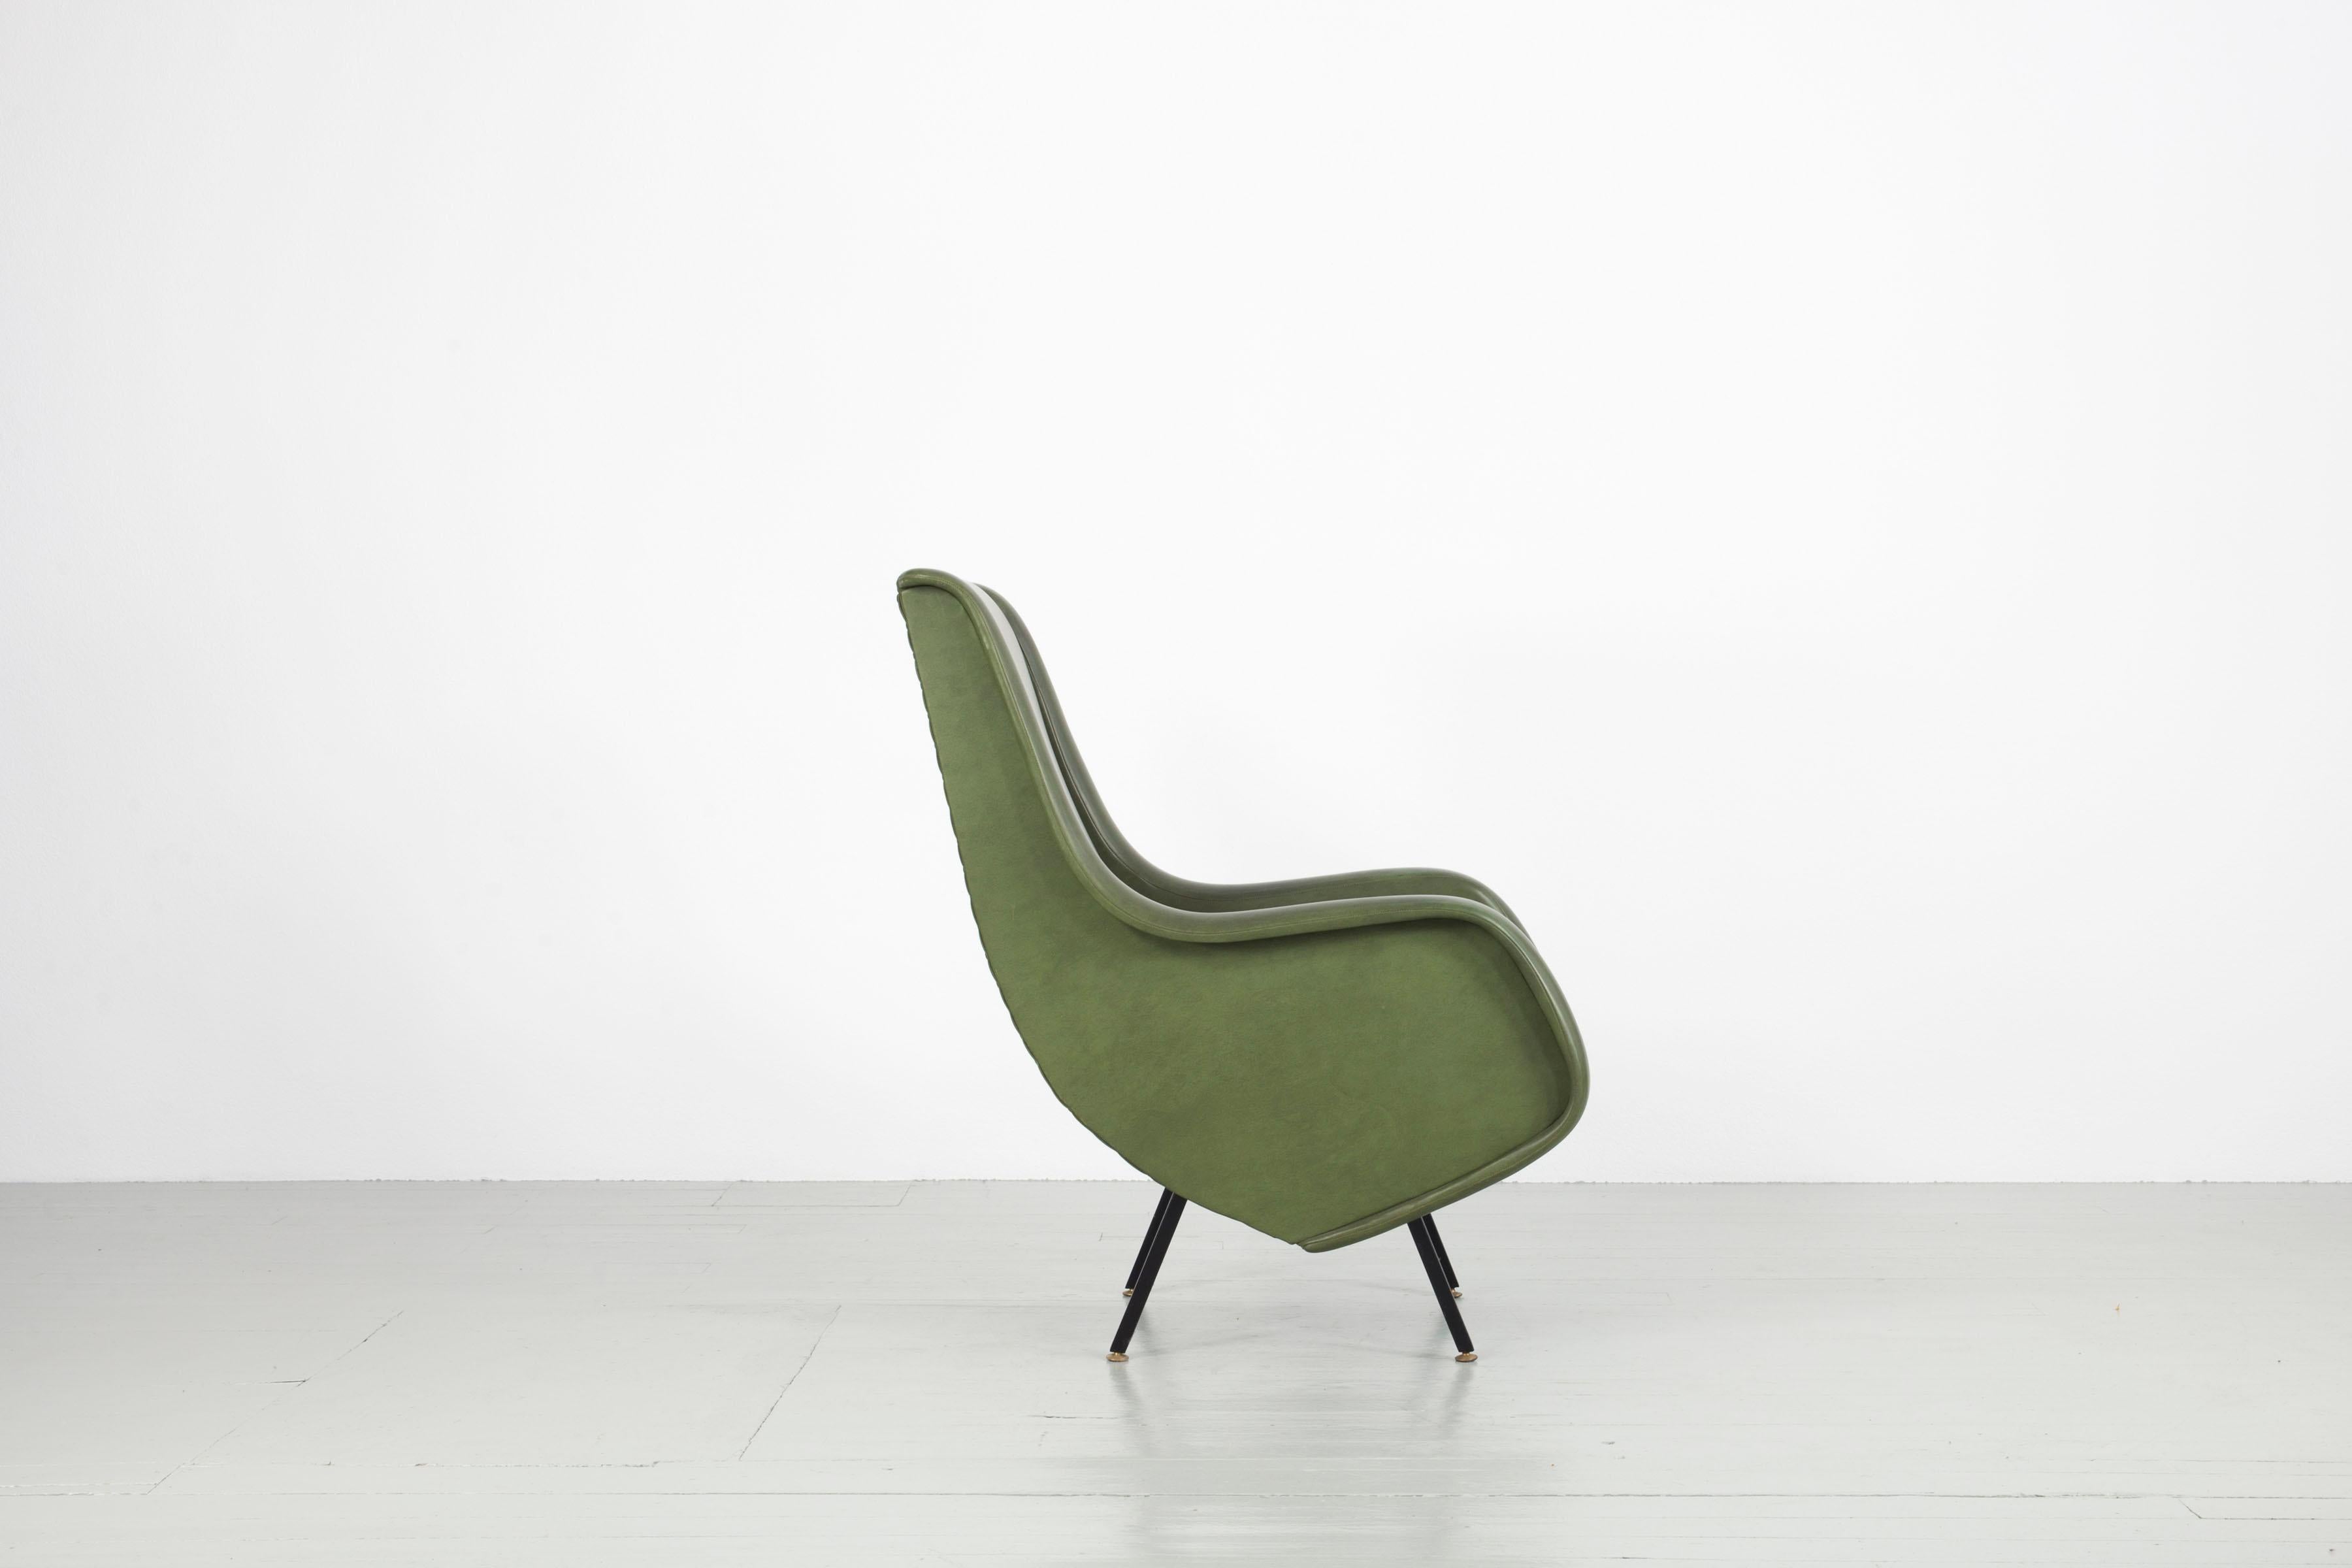 Blackened Pair of Italian Midcentury Armchairs in Original Green Fauxleather, 1950s For Sale